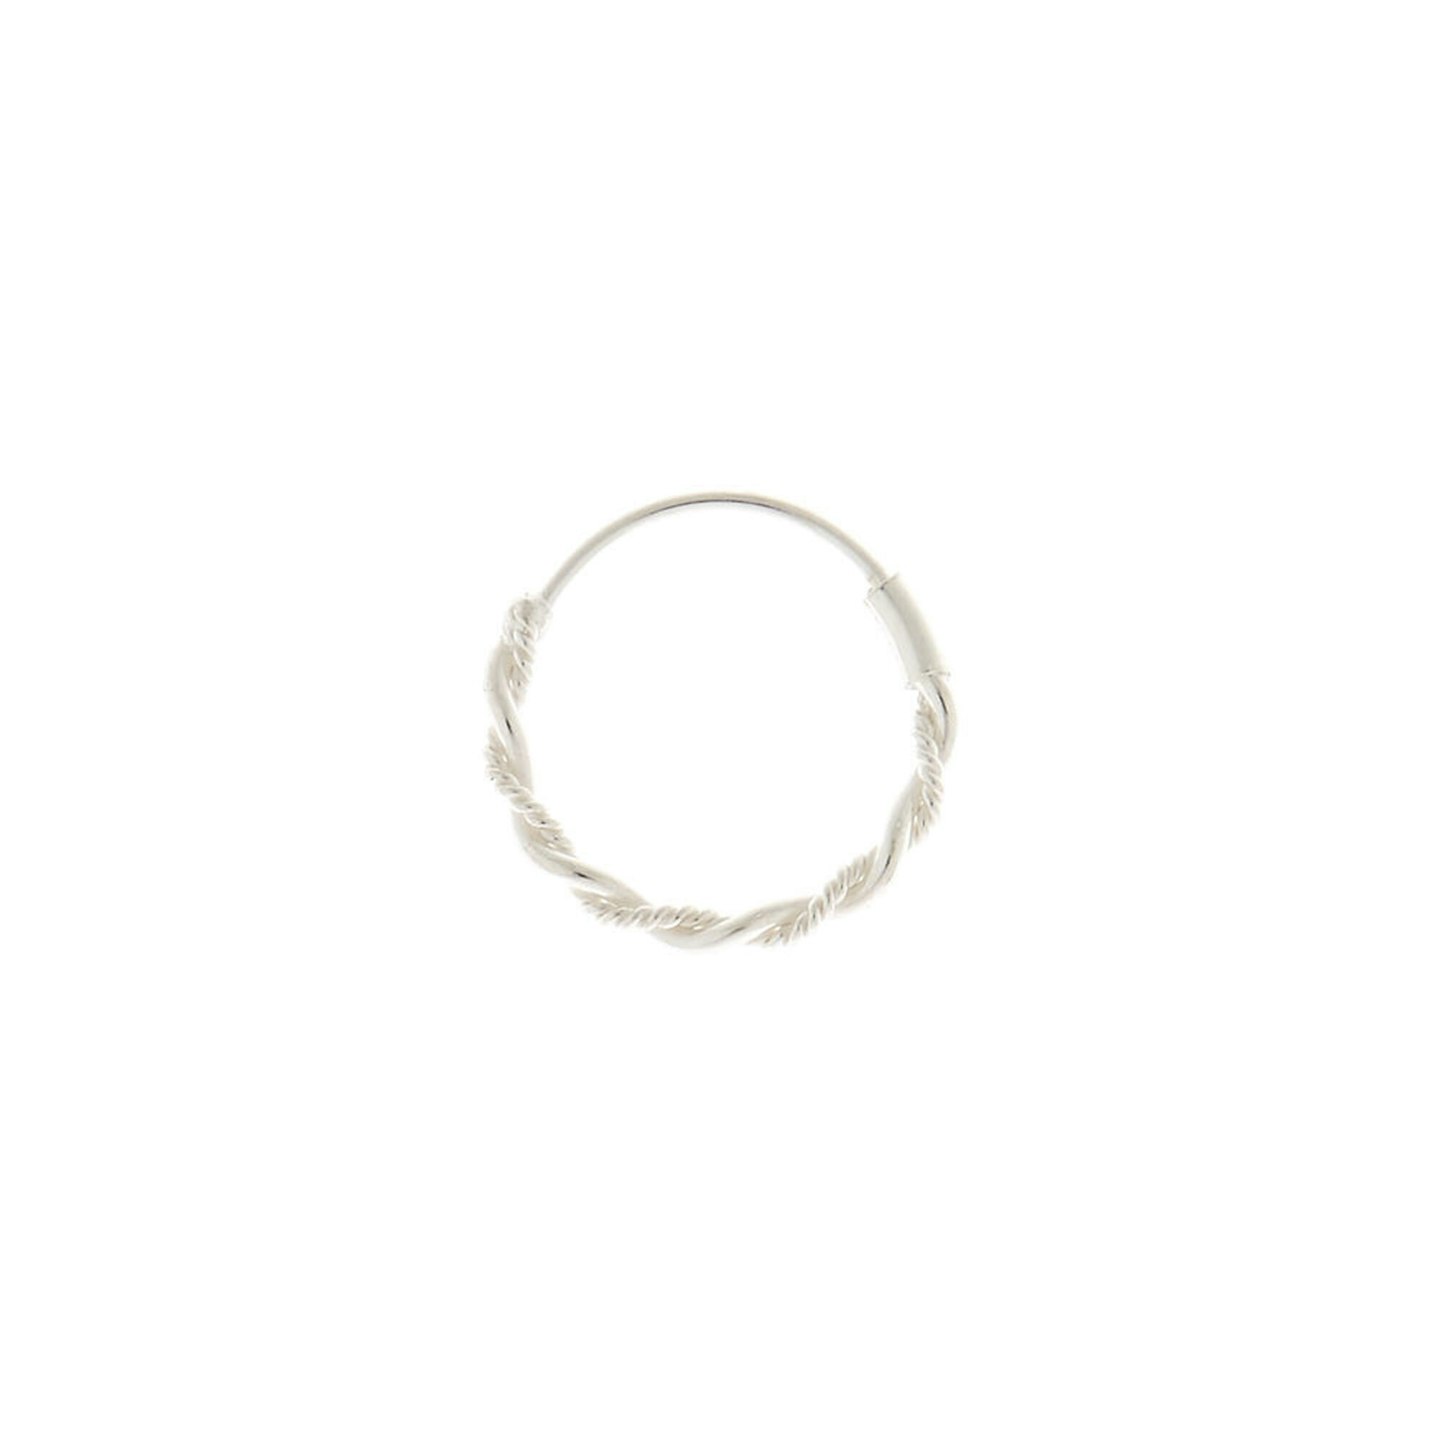 Claire's Accessories, Sterling Silver Braided Chain Nose Ring